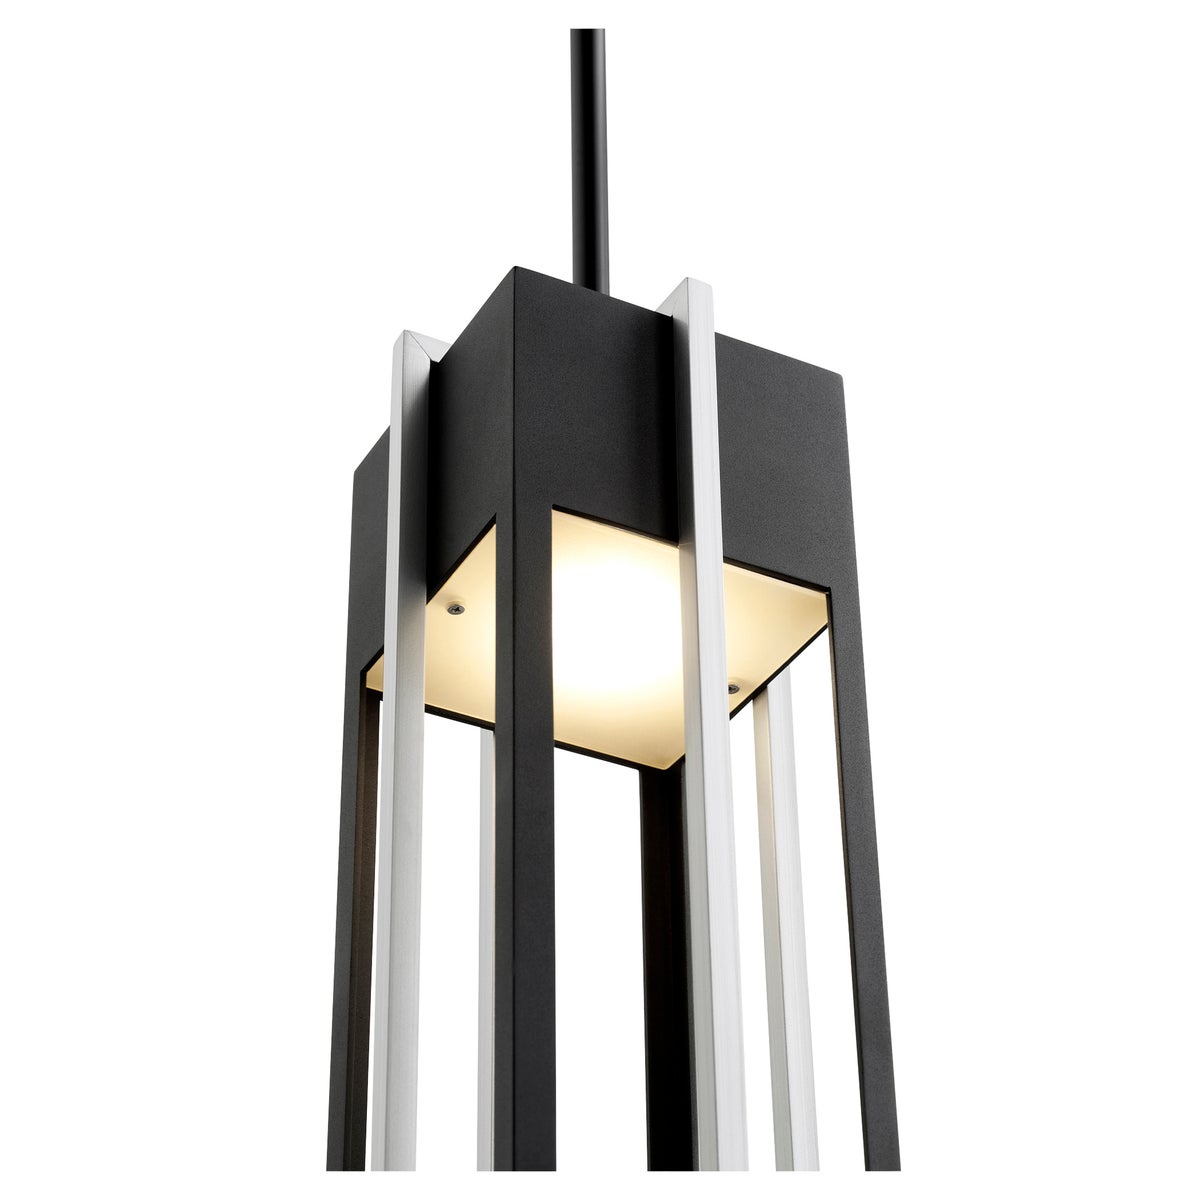 LED Outdoor Hanging Light with a unique geometric design, dual-layered frame, and noir/satin nickel finish. Provides guiding light for guests.